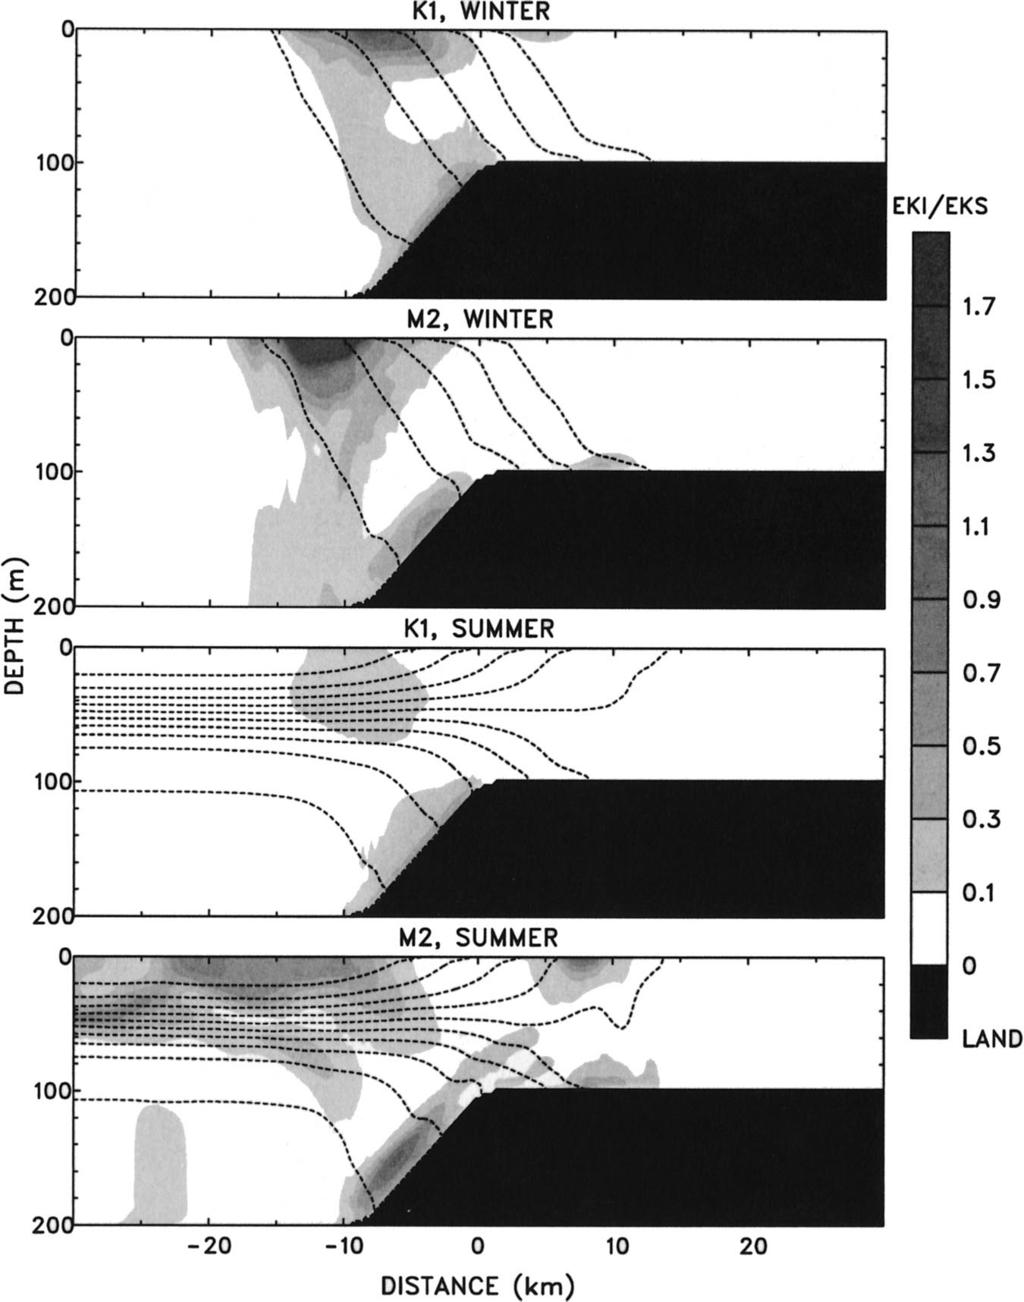 JANUARY 2003 CHEN ET AL. 181 FIG. 9. Ratio of mean kinetic energy of internal tide to that of surface tide for different cases (shades). Density field is shown as dashed contour lines.